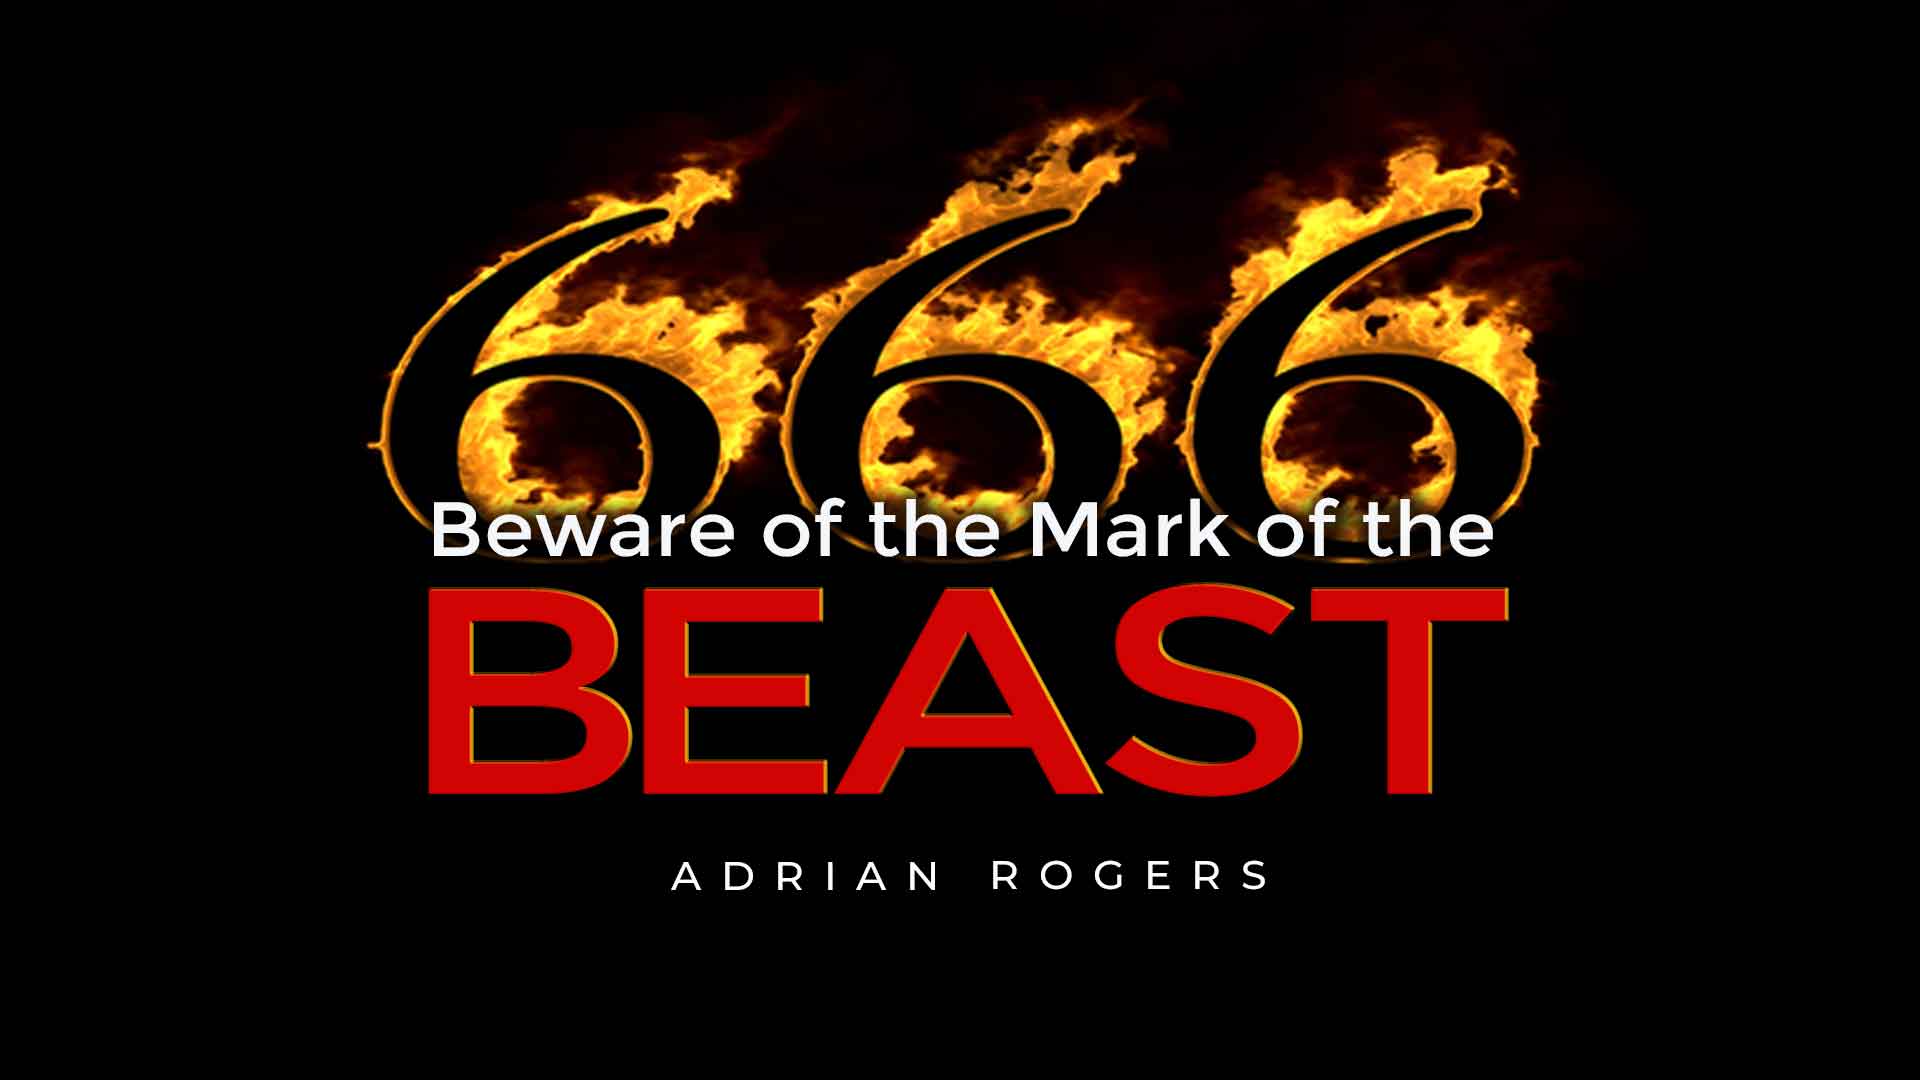 Beware of the Mark of the Beast 1920x1080